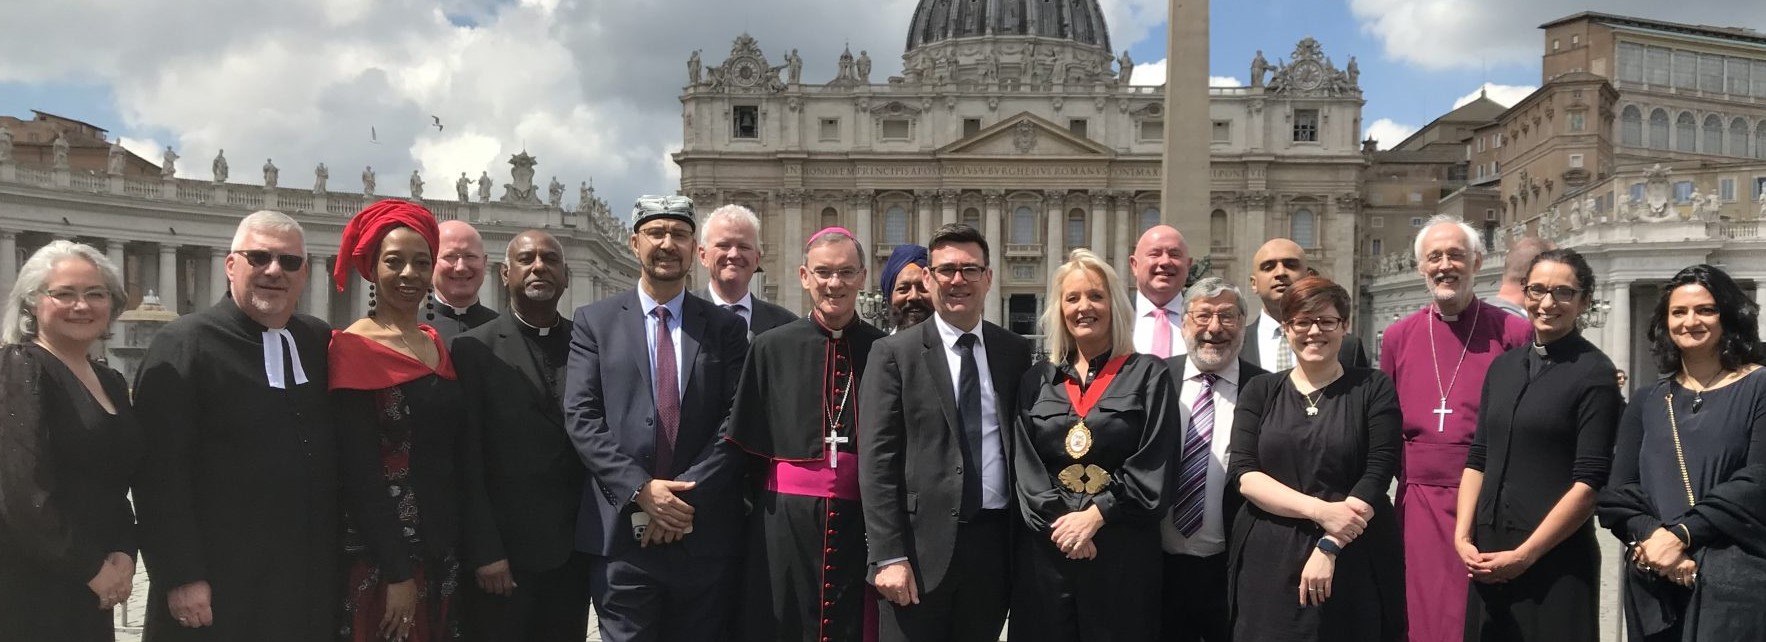 Faith leaders from across Greater Manchester with Andy Burnham in Rome.